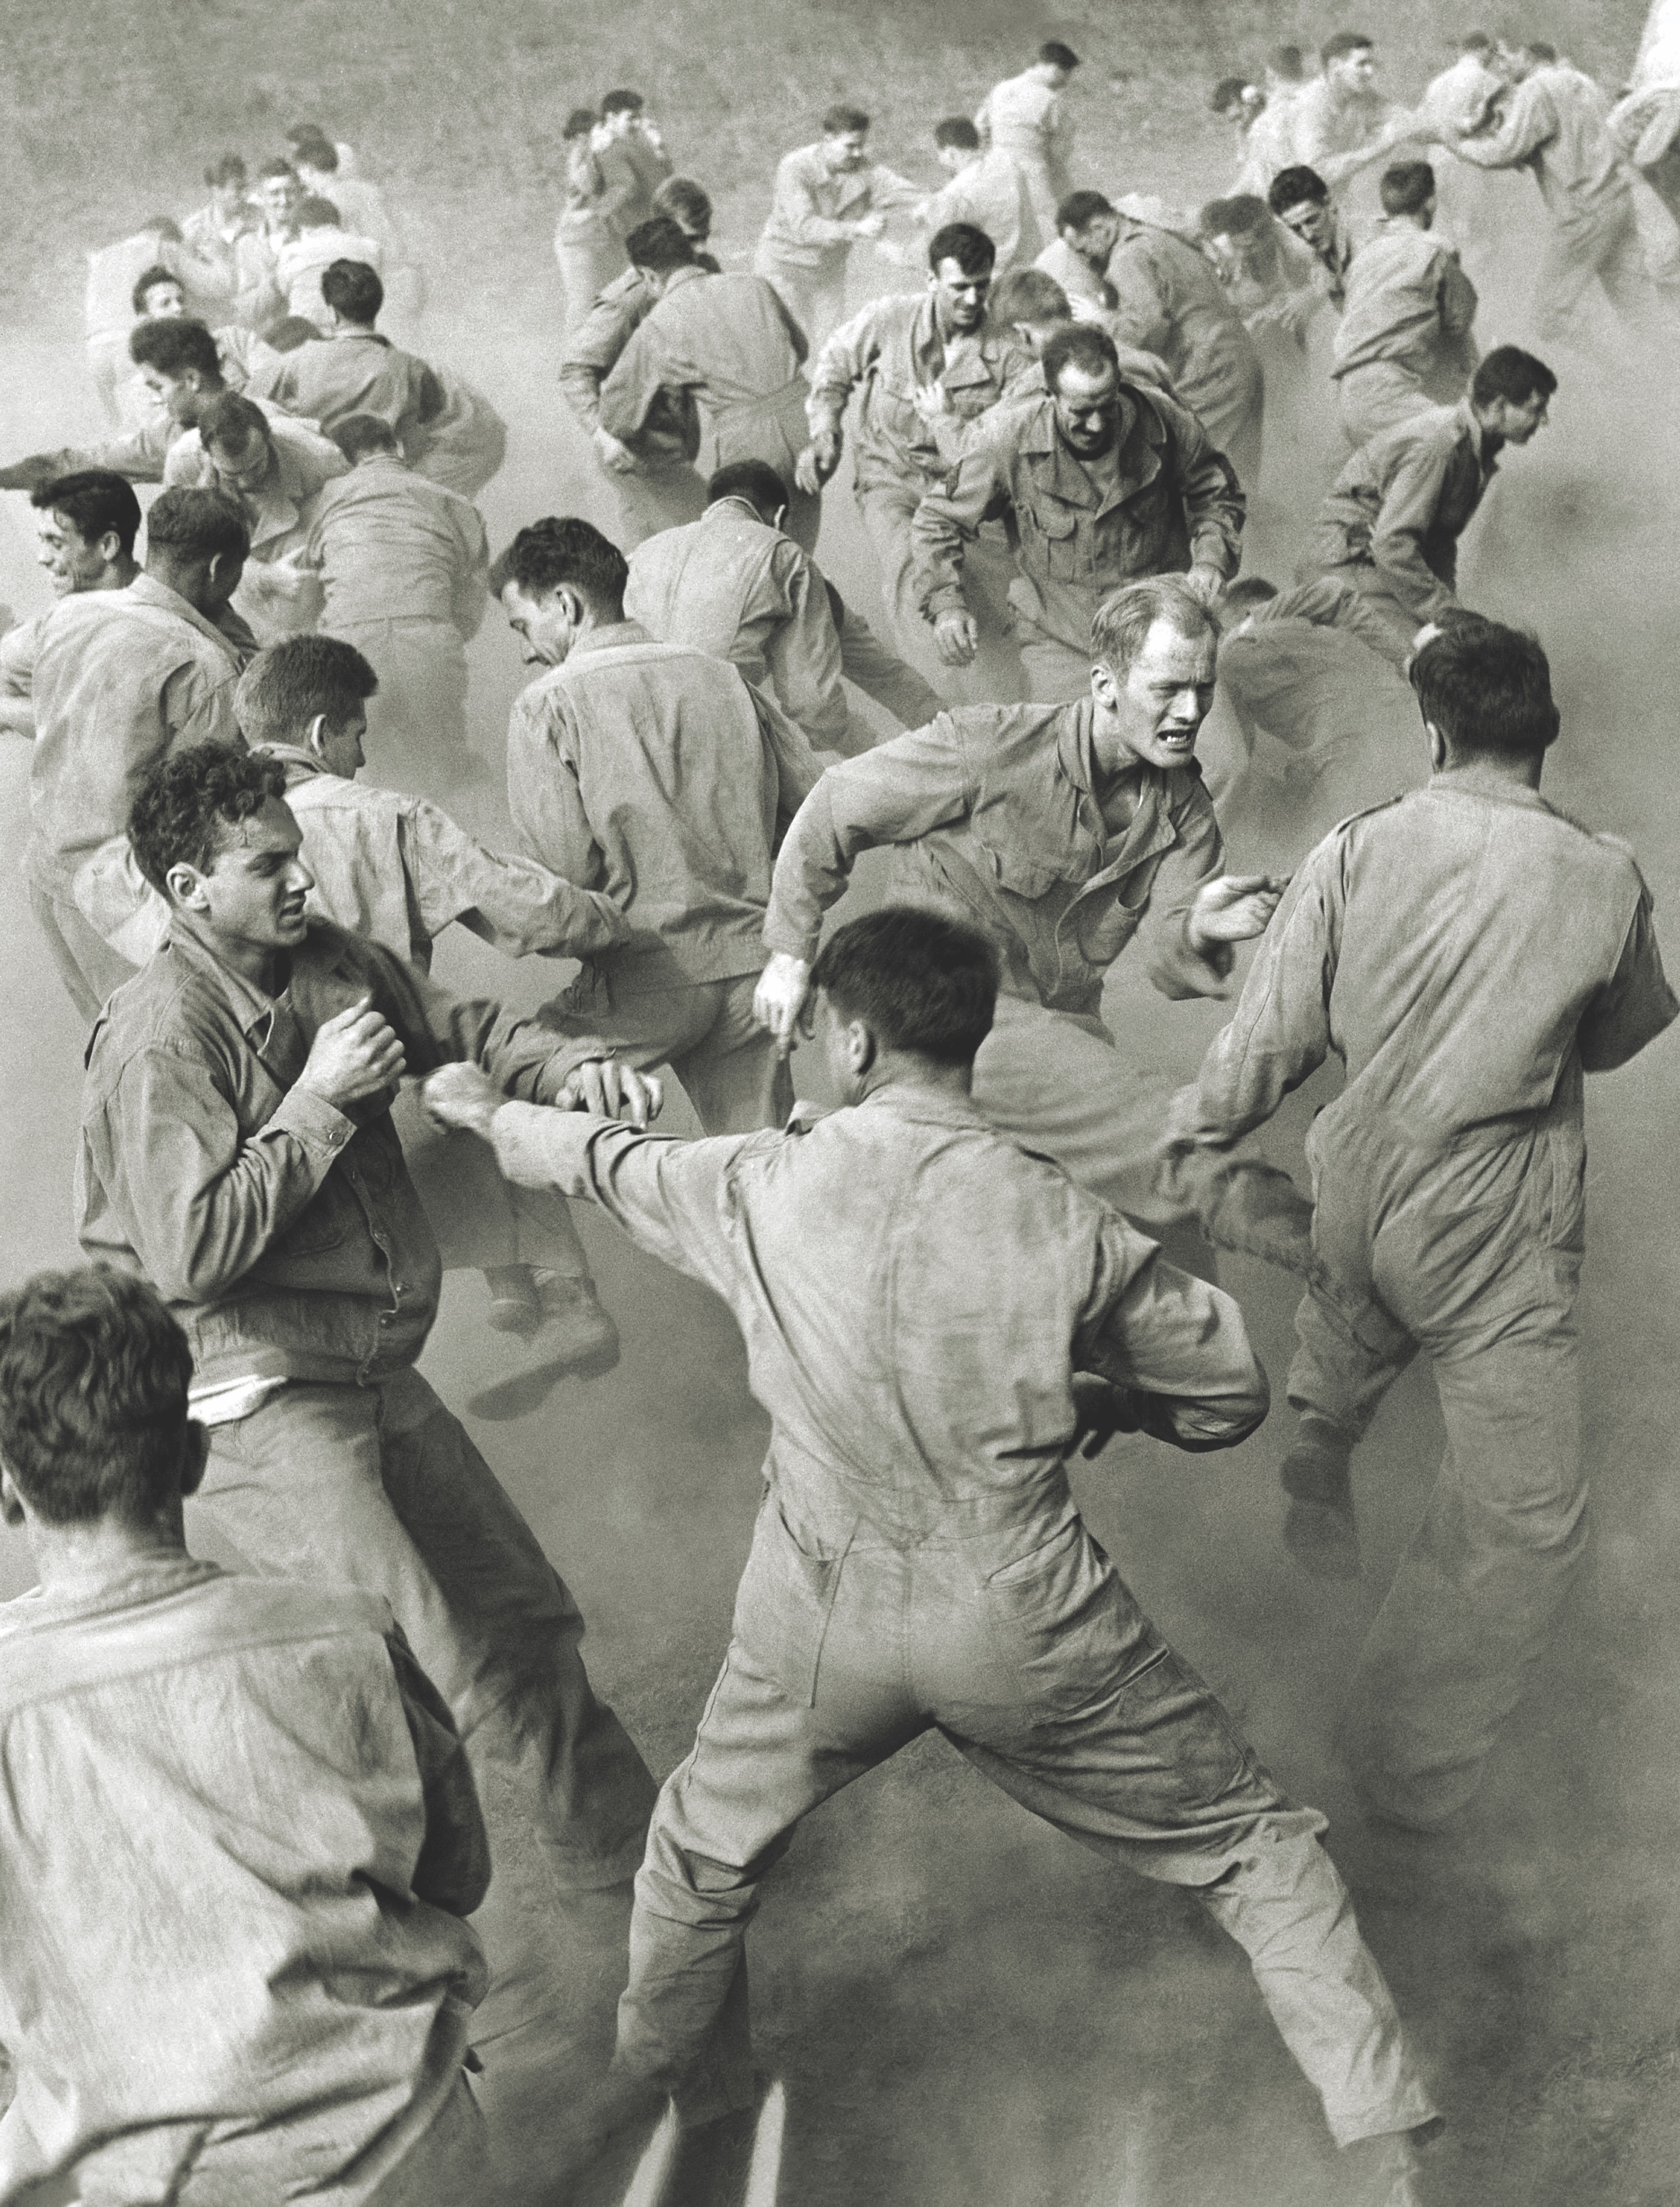 D’Eliscu’s training methods were sufficiently unorthodox for Life magazine to send a photographer to Fort Meade for a feature on what it called his “dirty fighting” system.